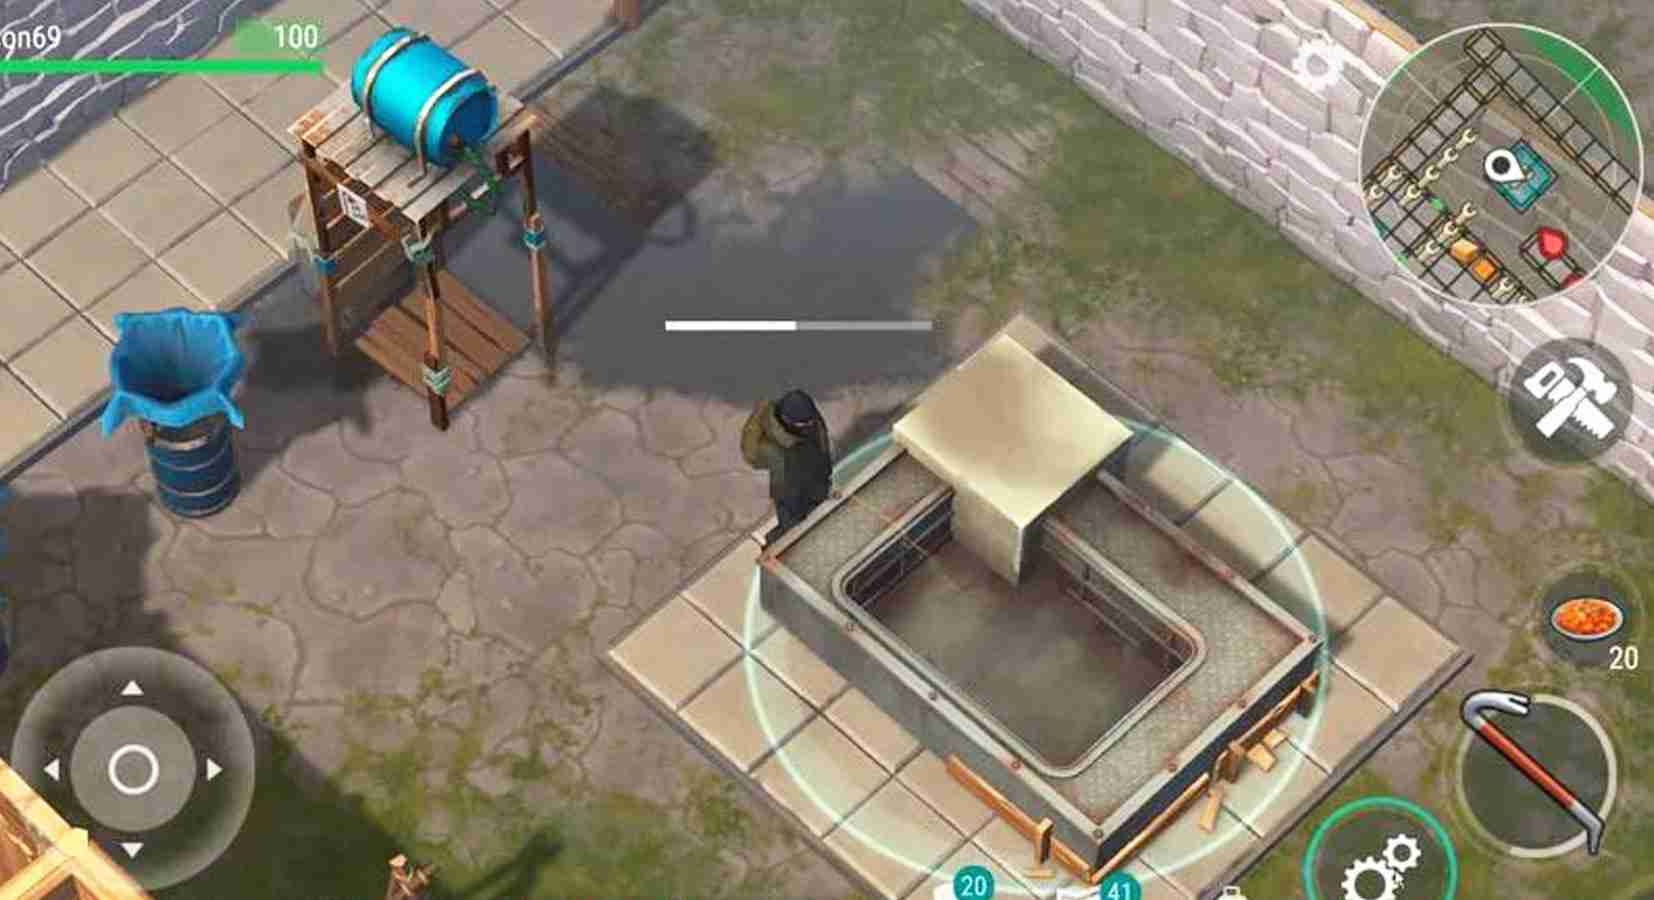  game Last Day on Earth: Survival mod hack